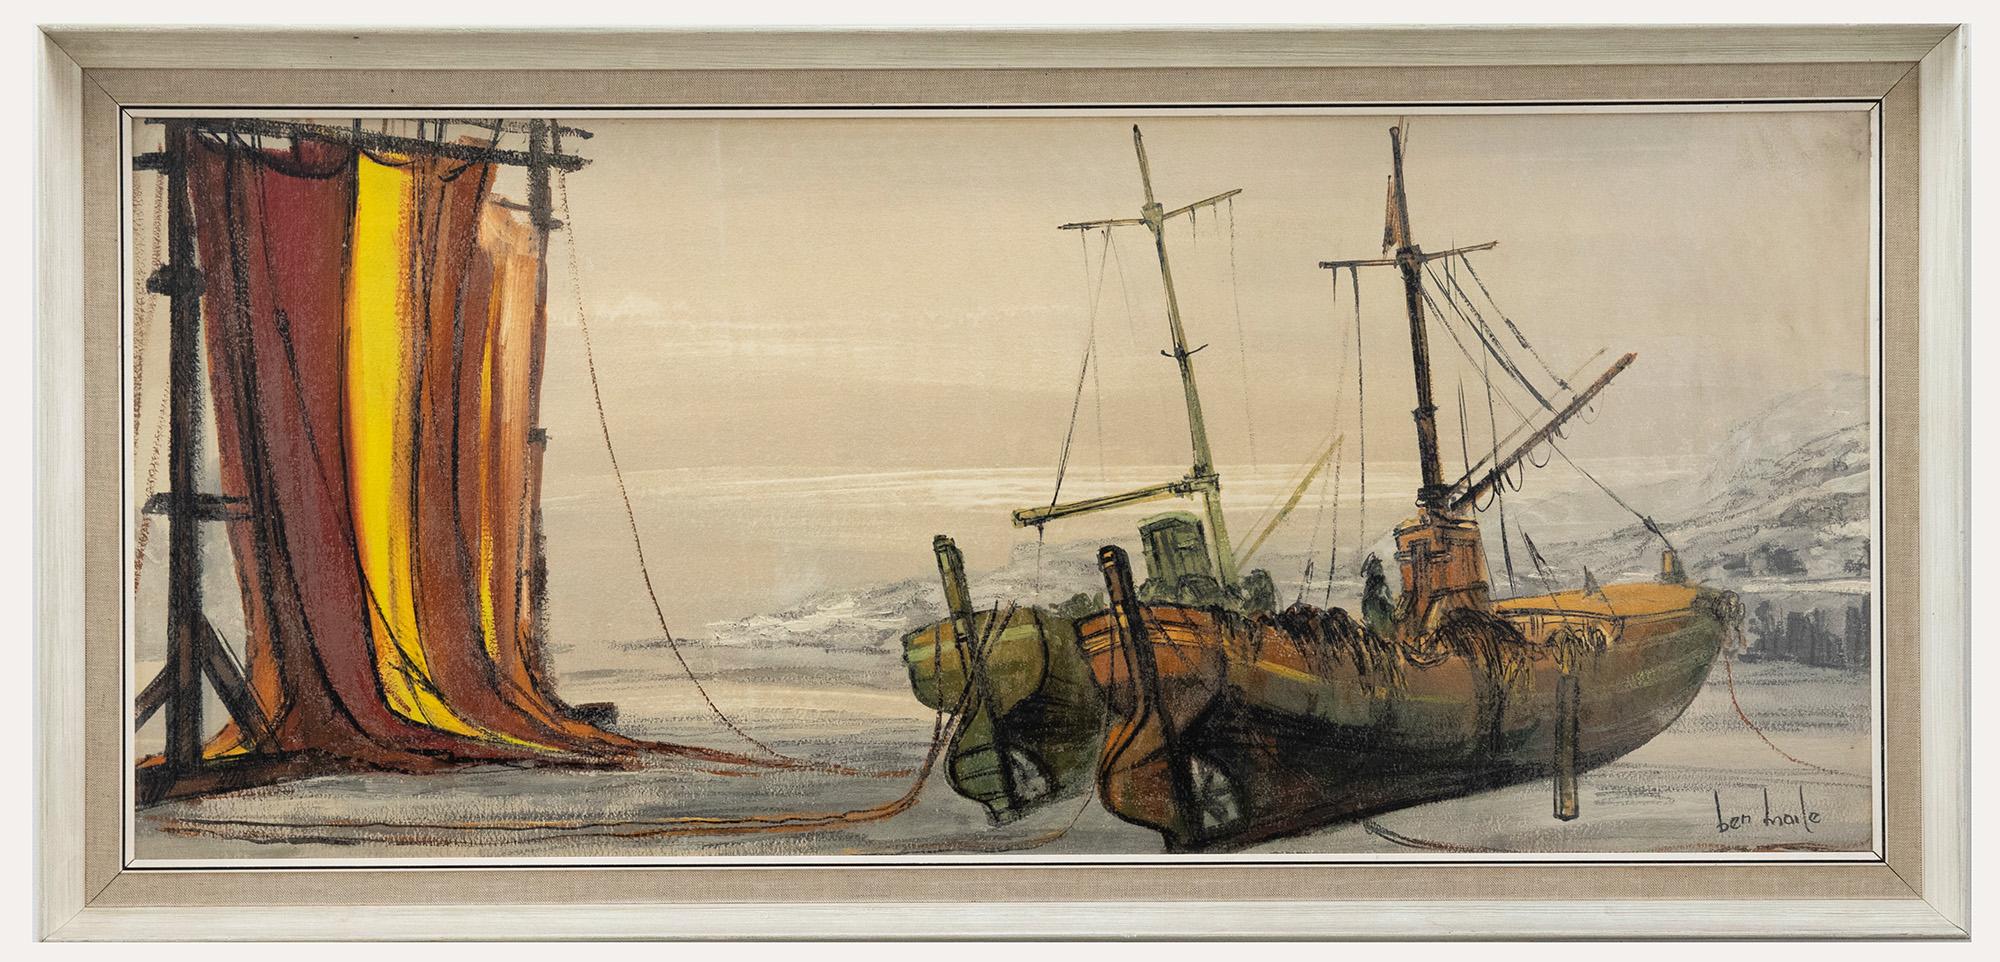 A delightful study of fishing boats at low tide in oil with ink details. Signed to the lower right. Presented in a wooden frame with a cotton slip. On paper laid to board.
